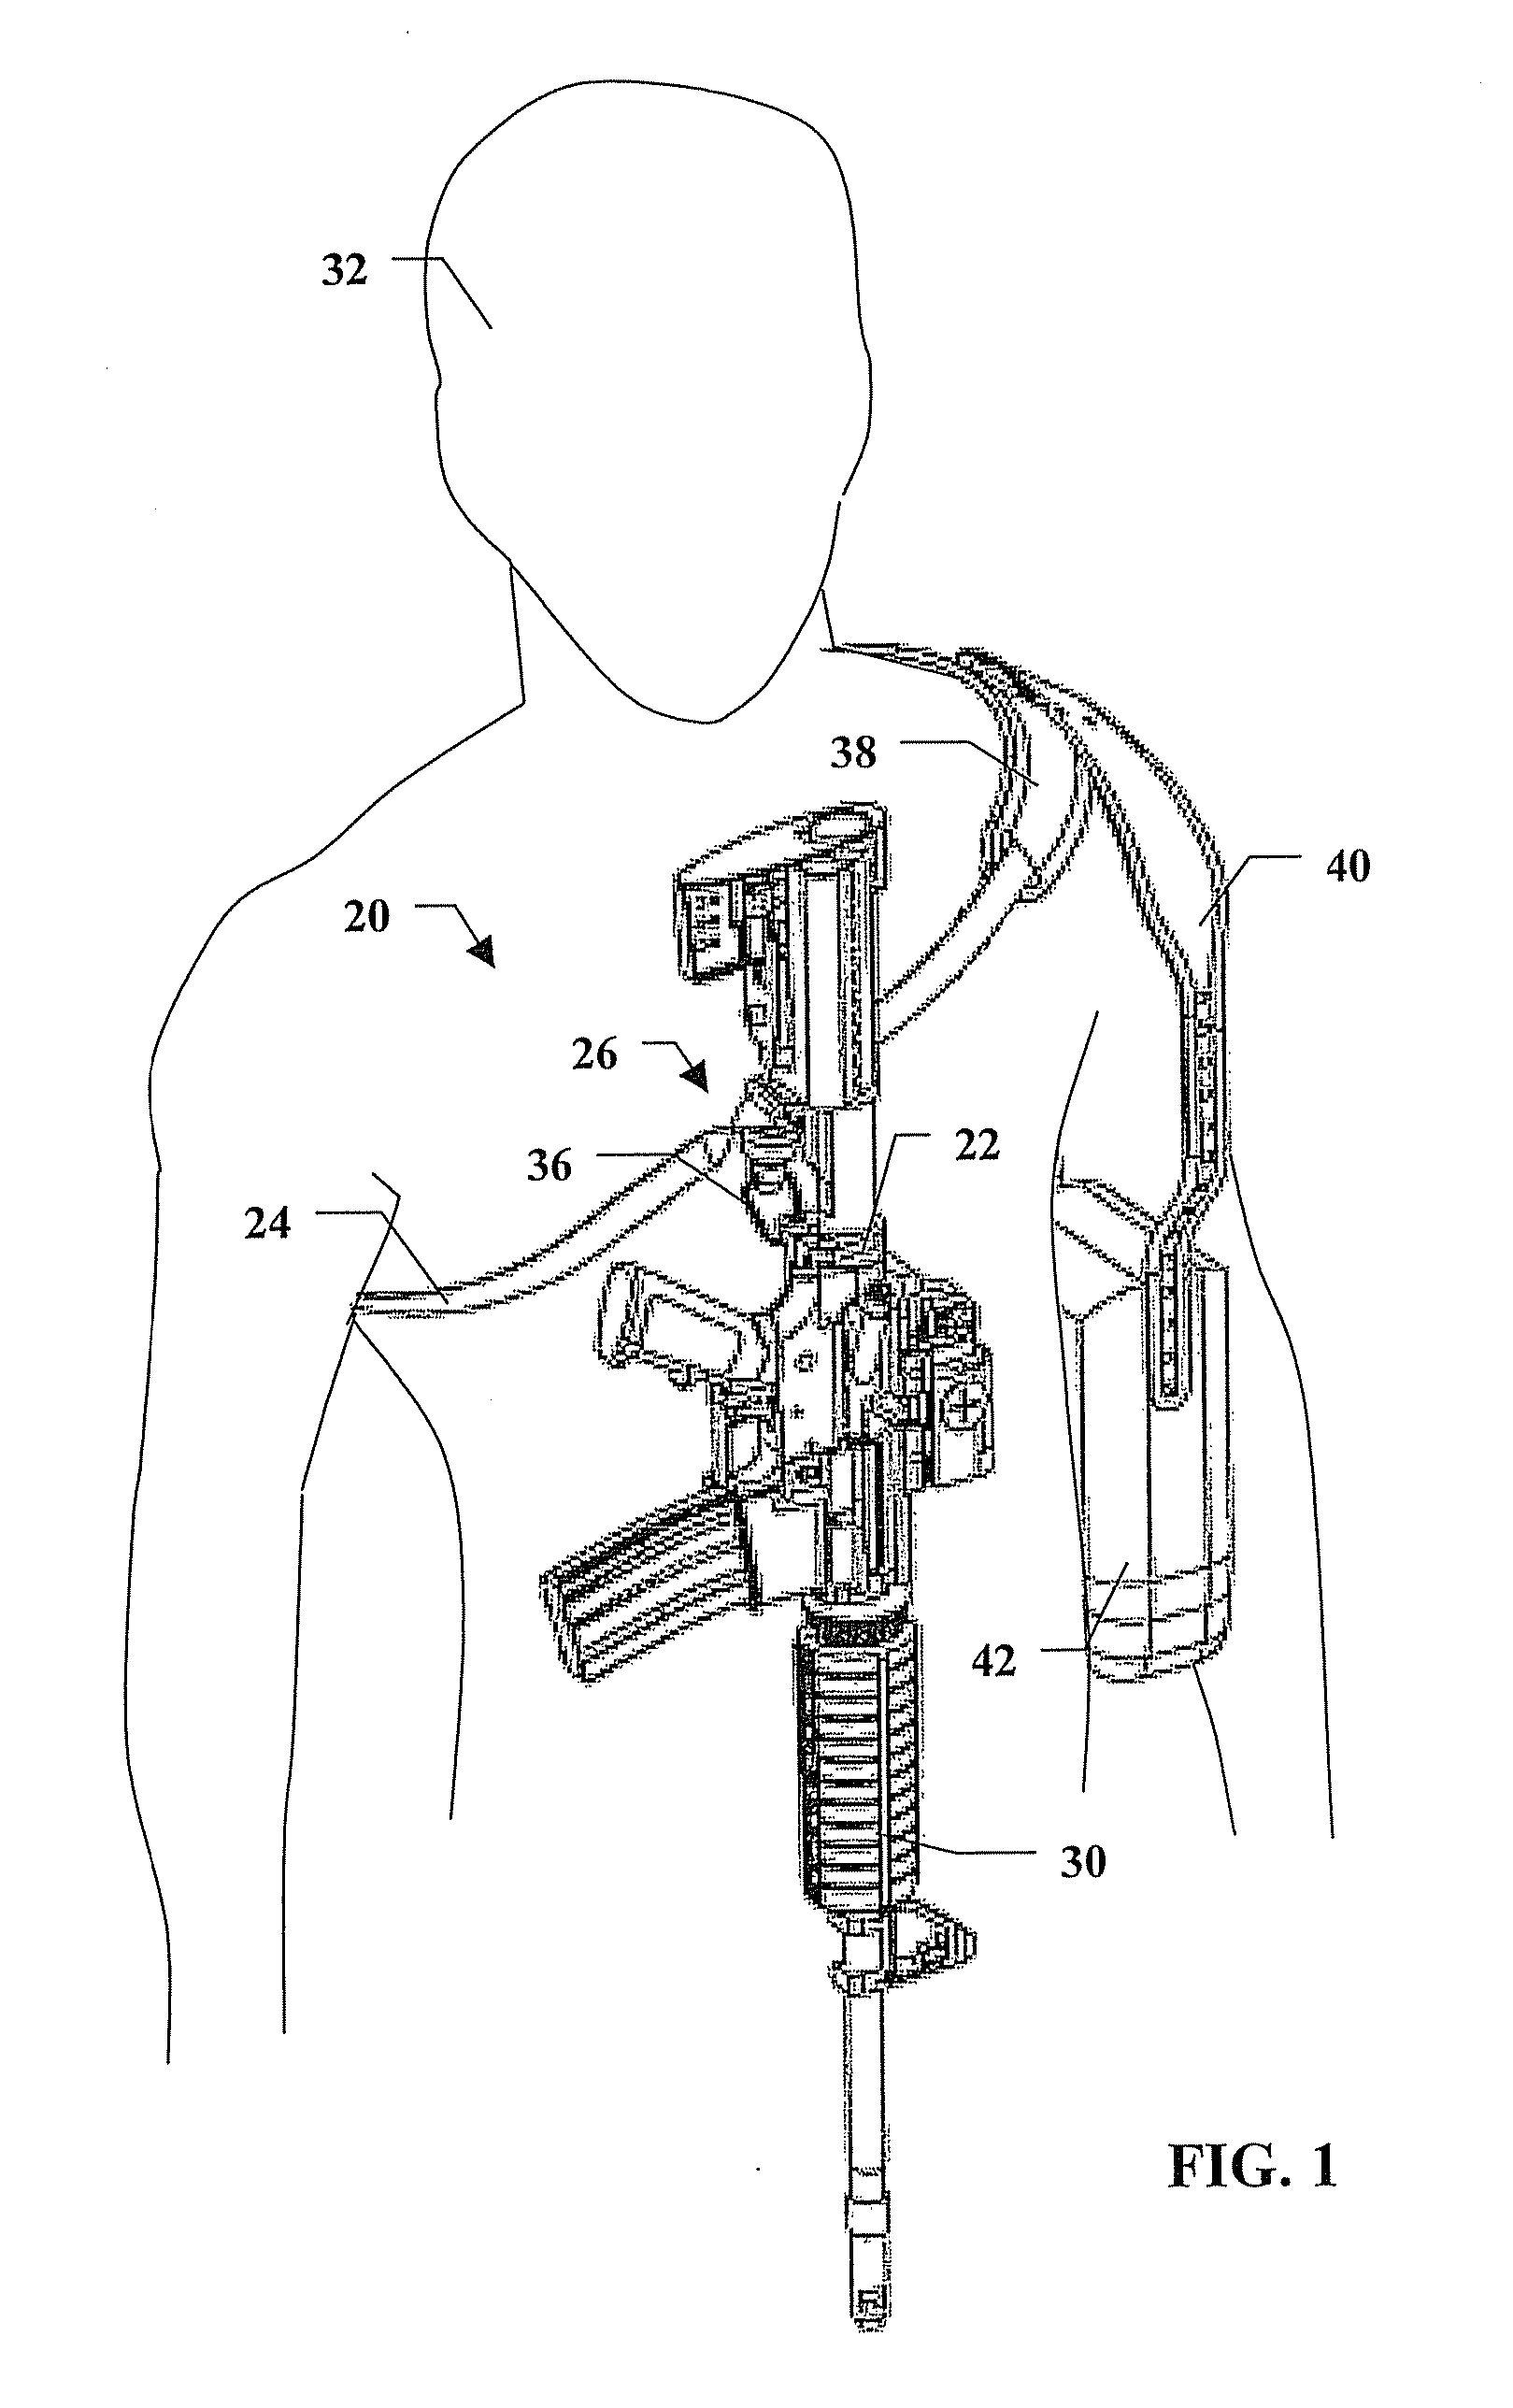 Firearm sling assembly, related mechanisms and methods